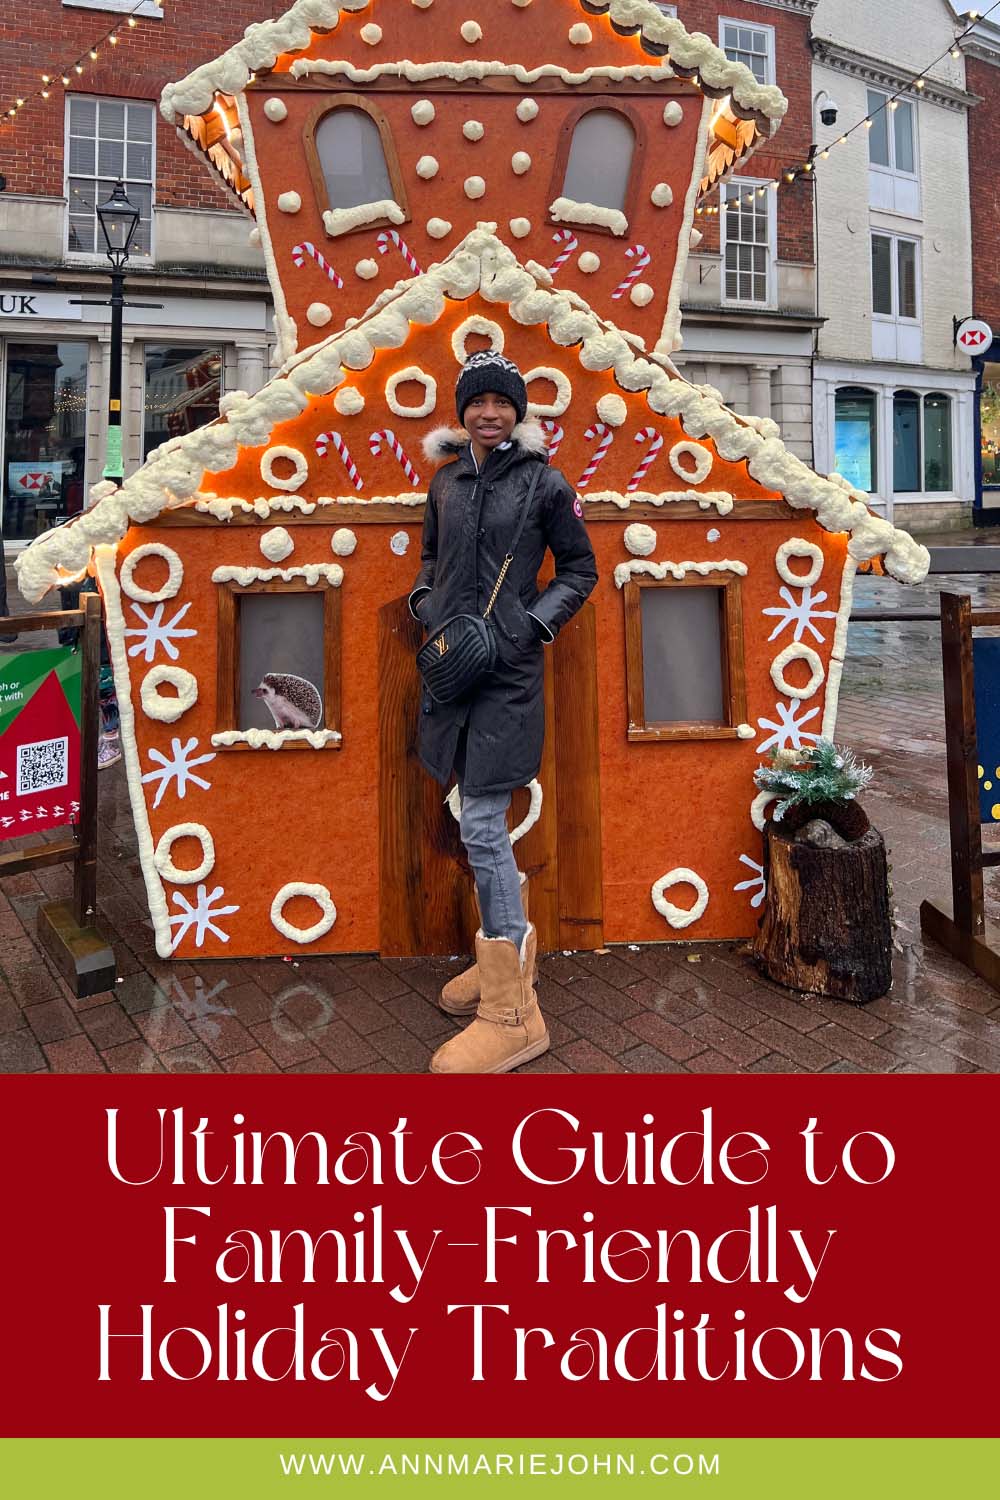 Ultimate Guide to Family-Friendly Holiday Traditions